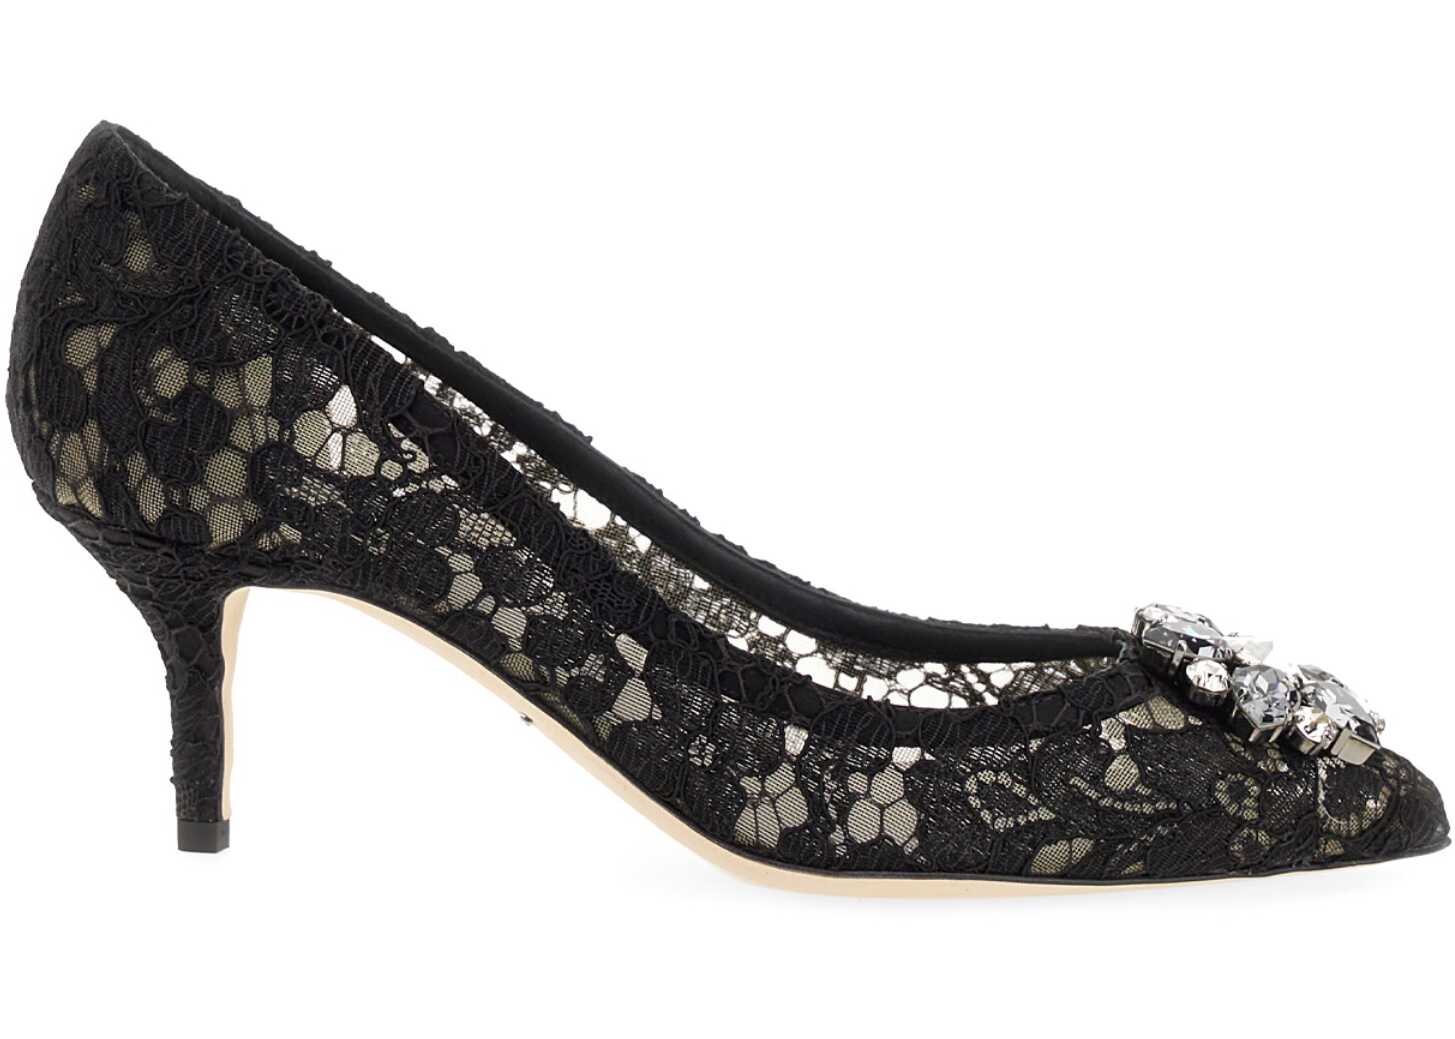 Dolce & Gabbana Pumps With Crystals BLACK b-mall.ro